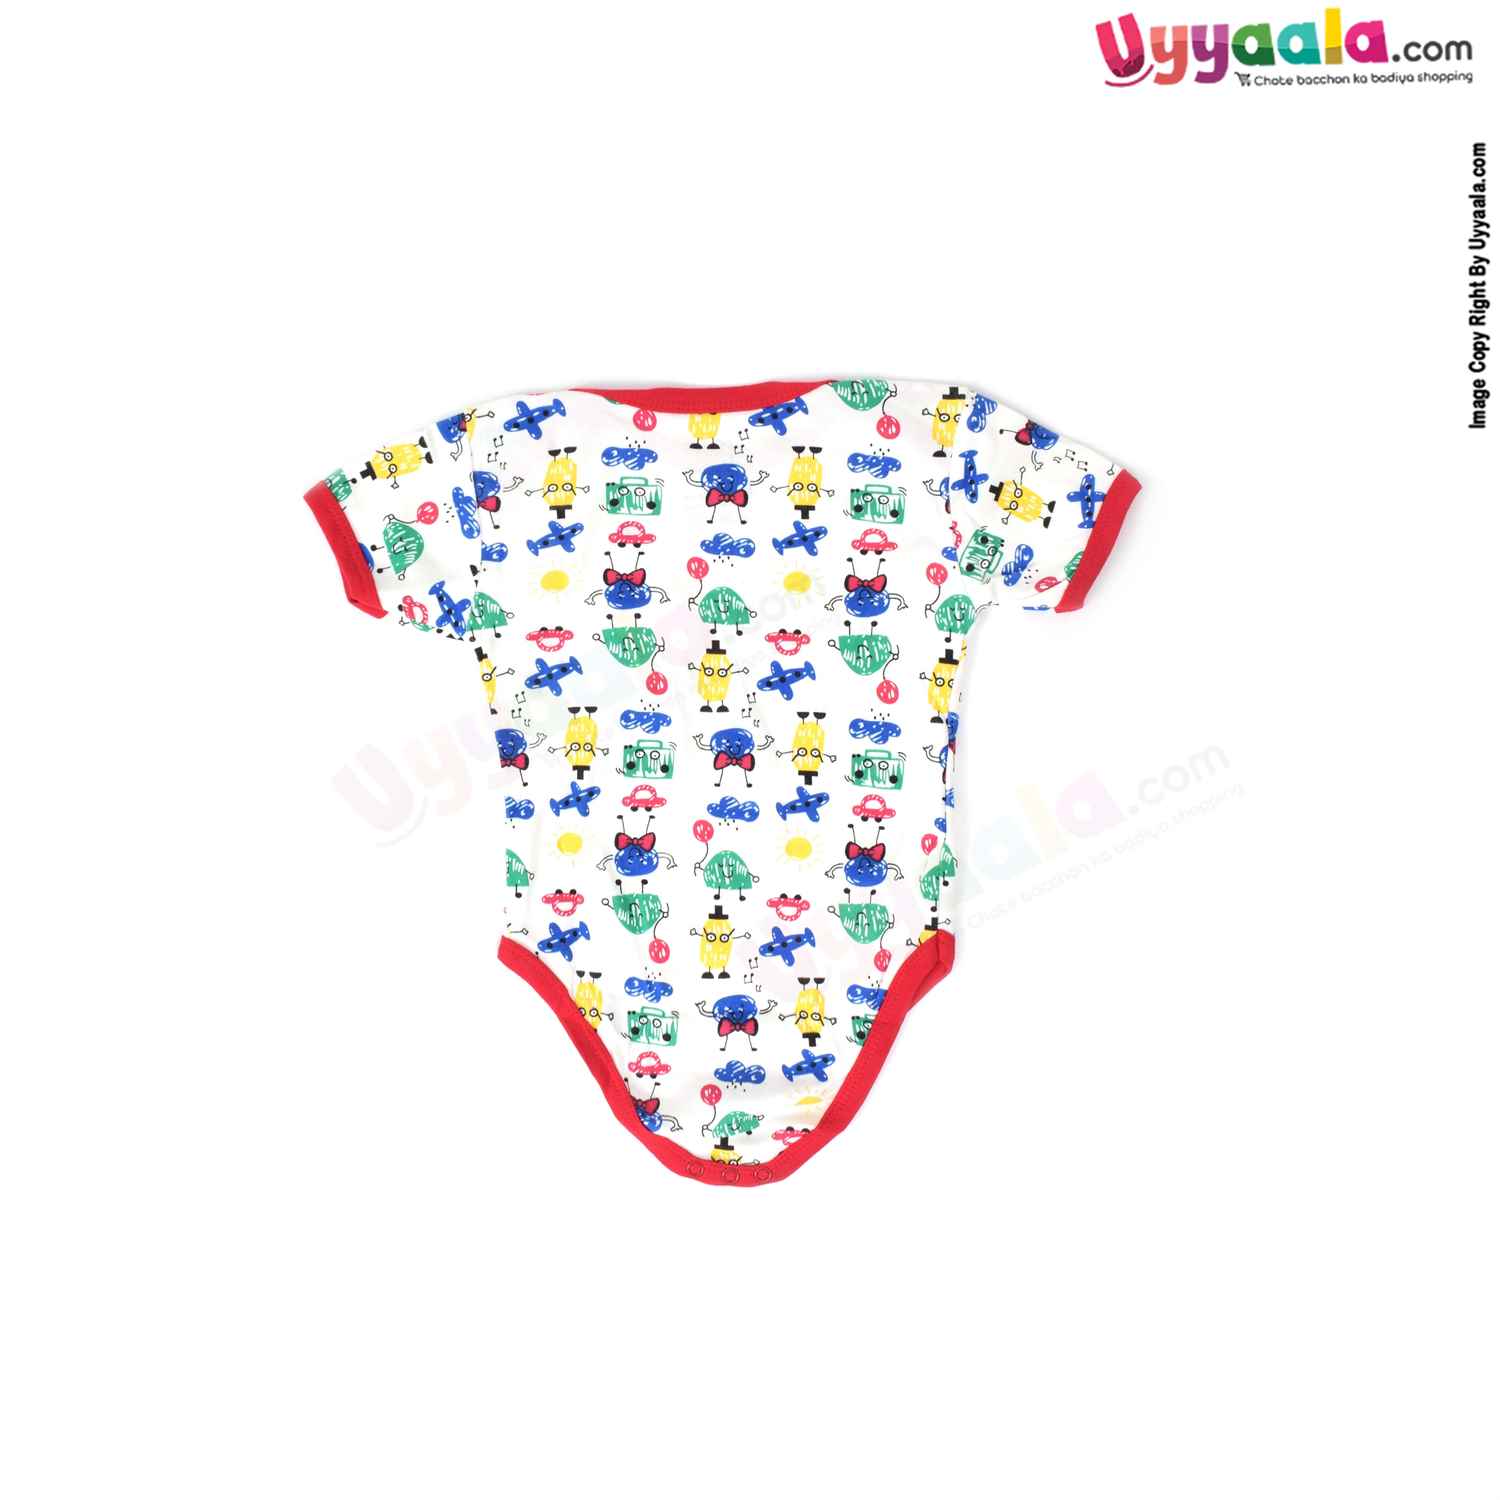 Precious One Short Sleeve Body Suit 100% Soft Hosiery Cotton - Red & White with Assorted Print (9-12M)